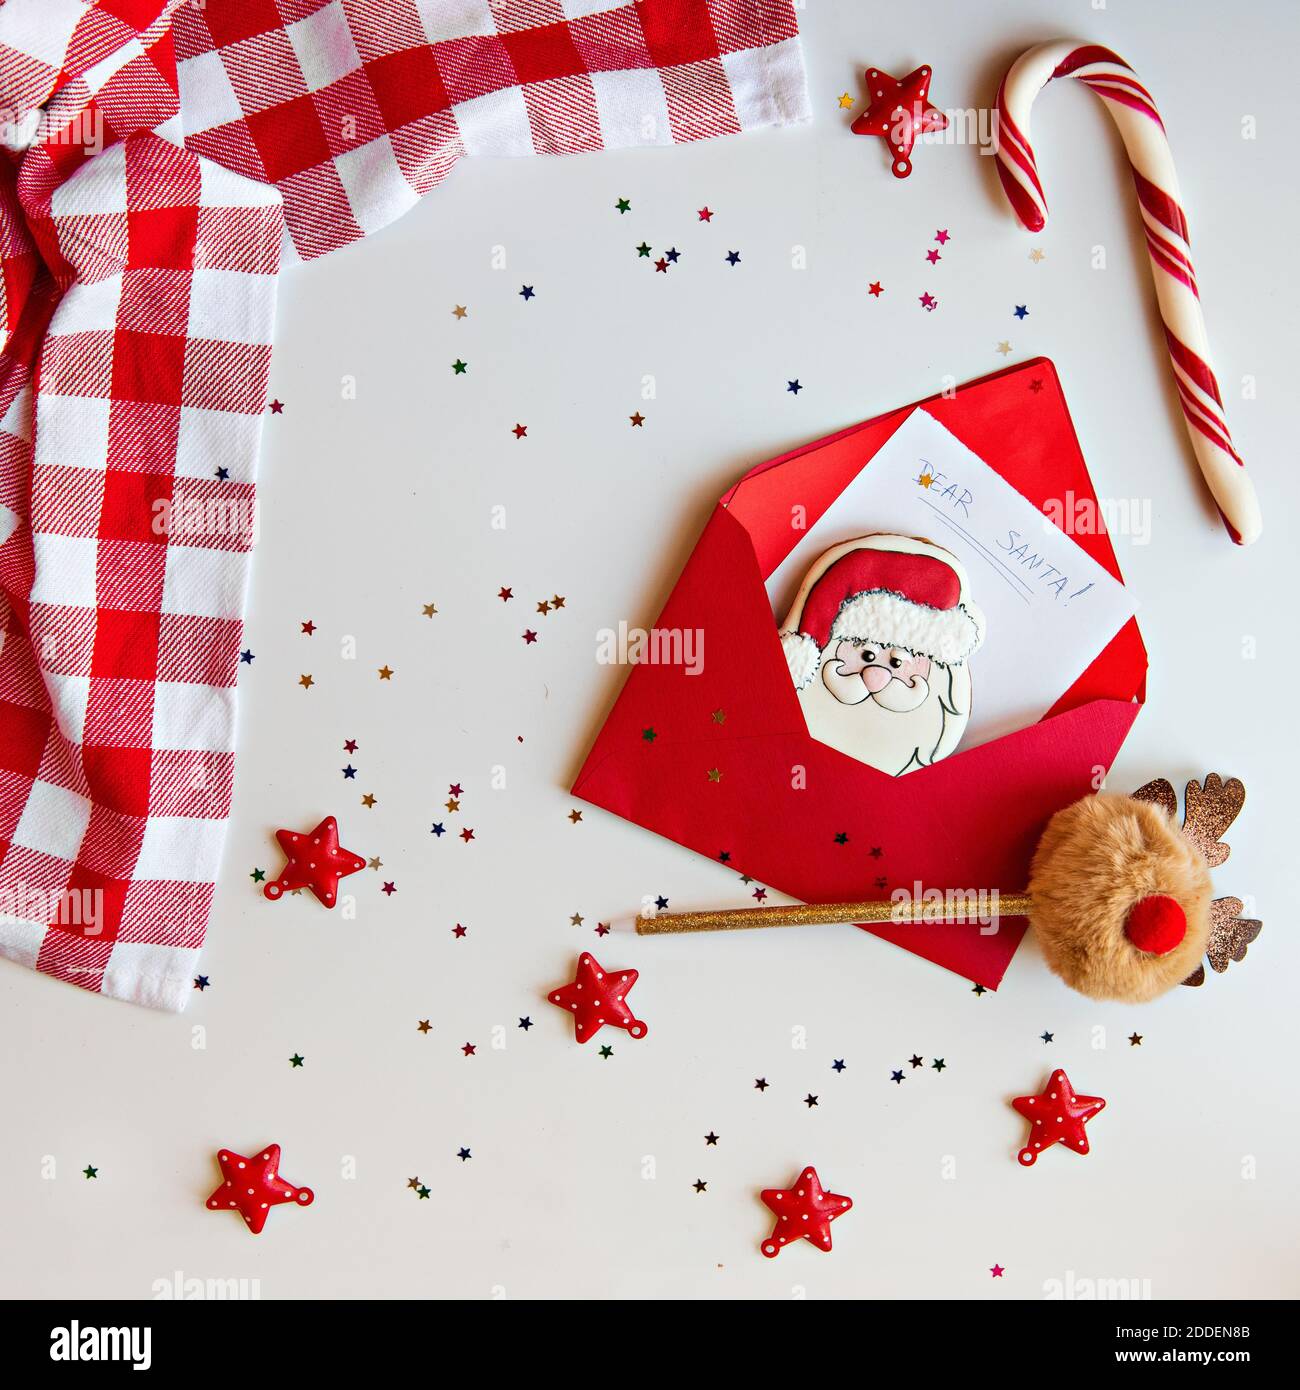 Flatlay New Year's in white and red colors. Christmas card with stars confetti. A letter to Santa Claus with a gingerbread cookie. Deer pom-pom handle Stock Photo